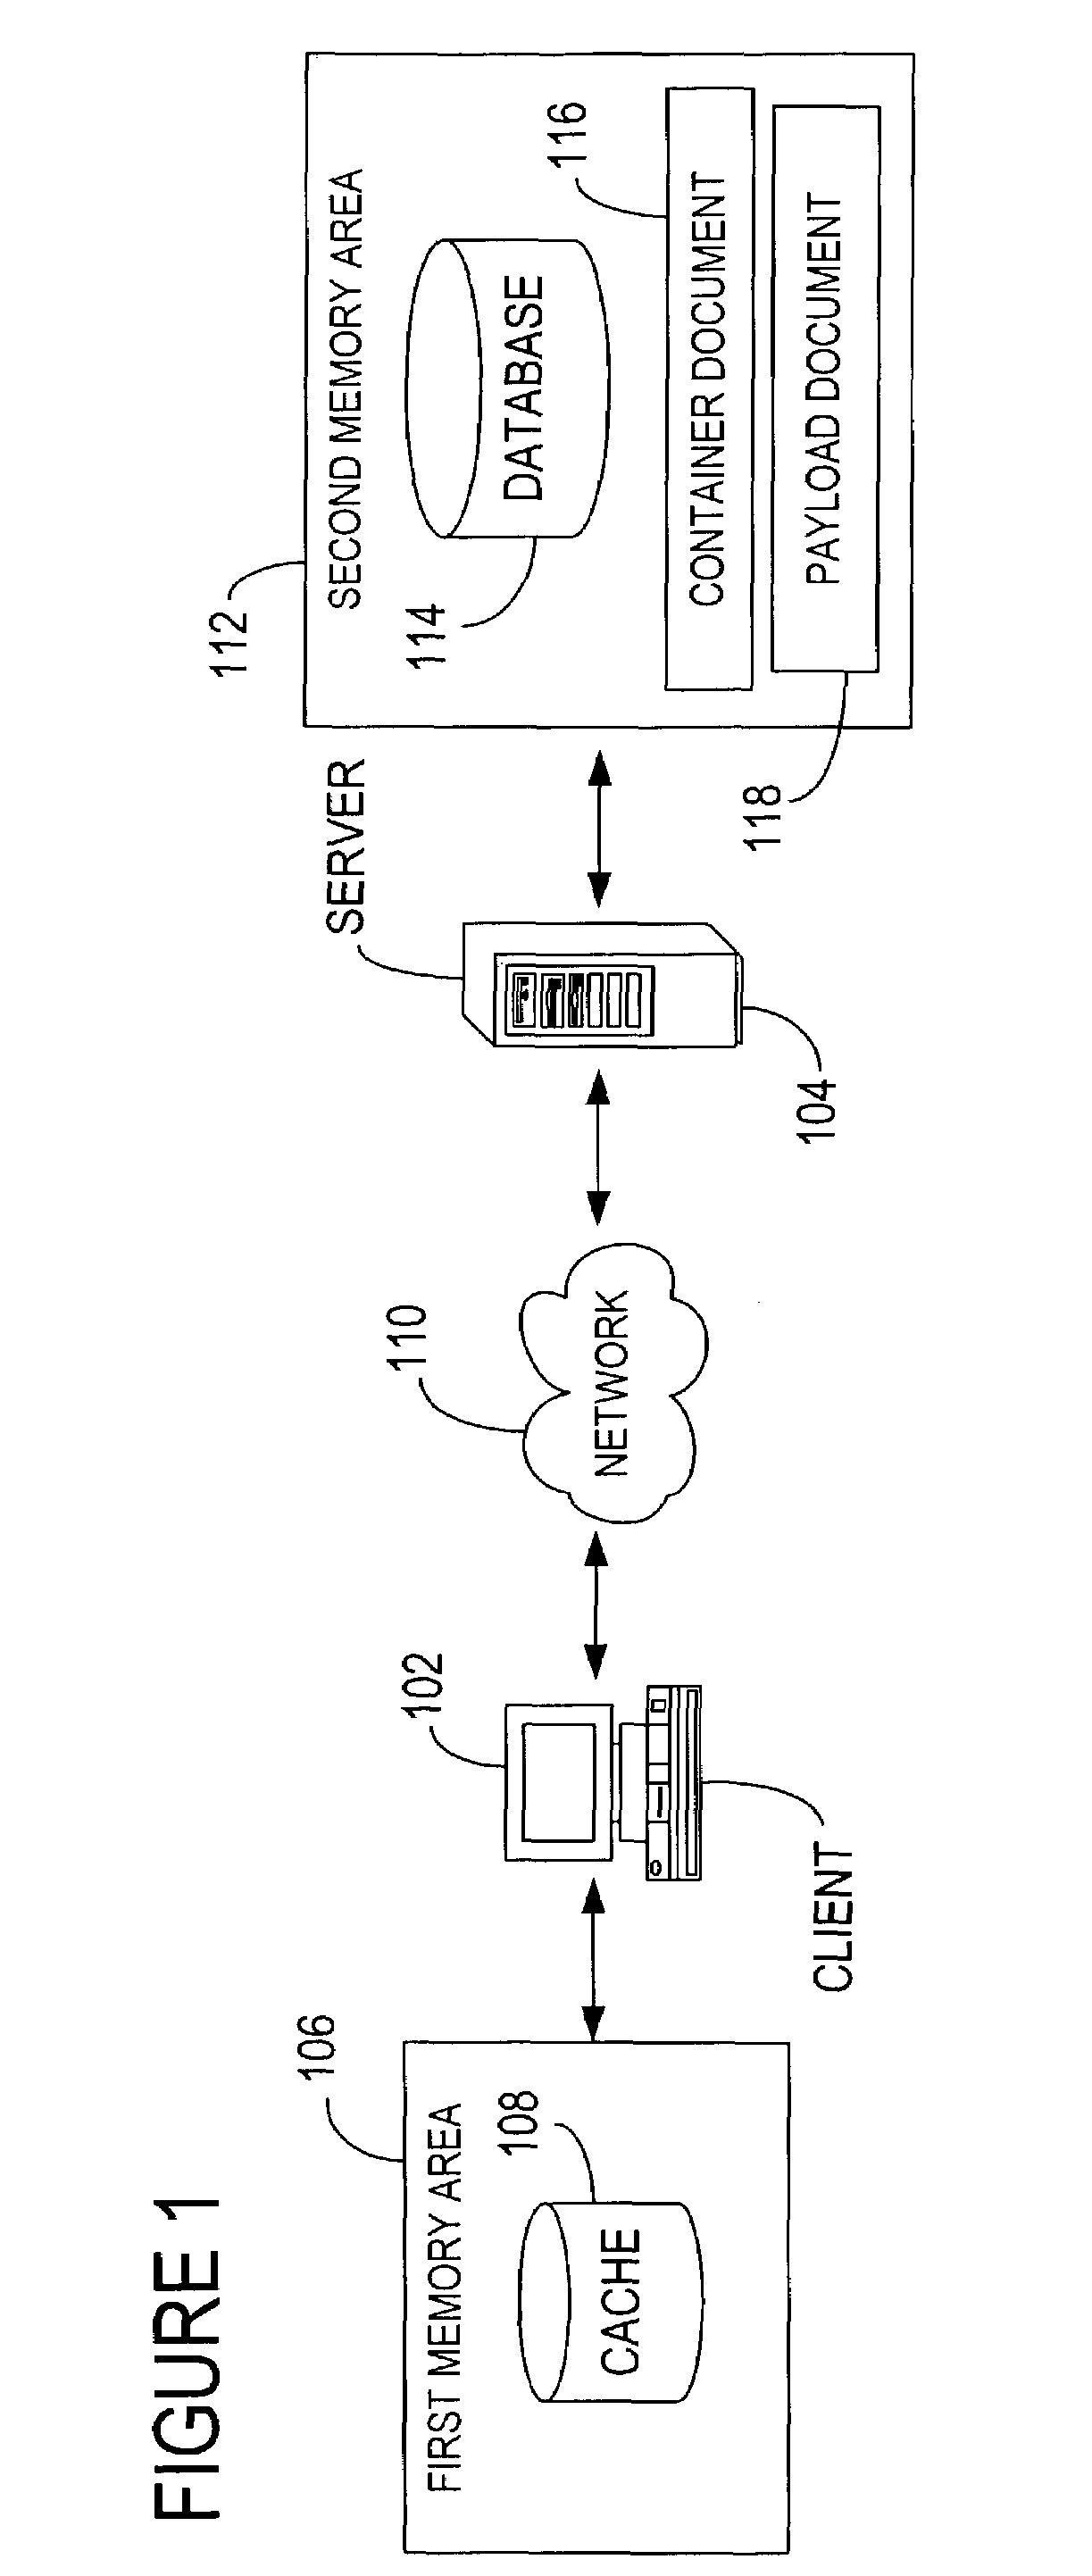 Managing state information across communication sessions between a client and a server via a stateless protocol